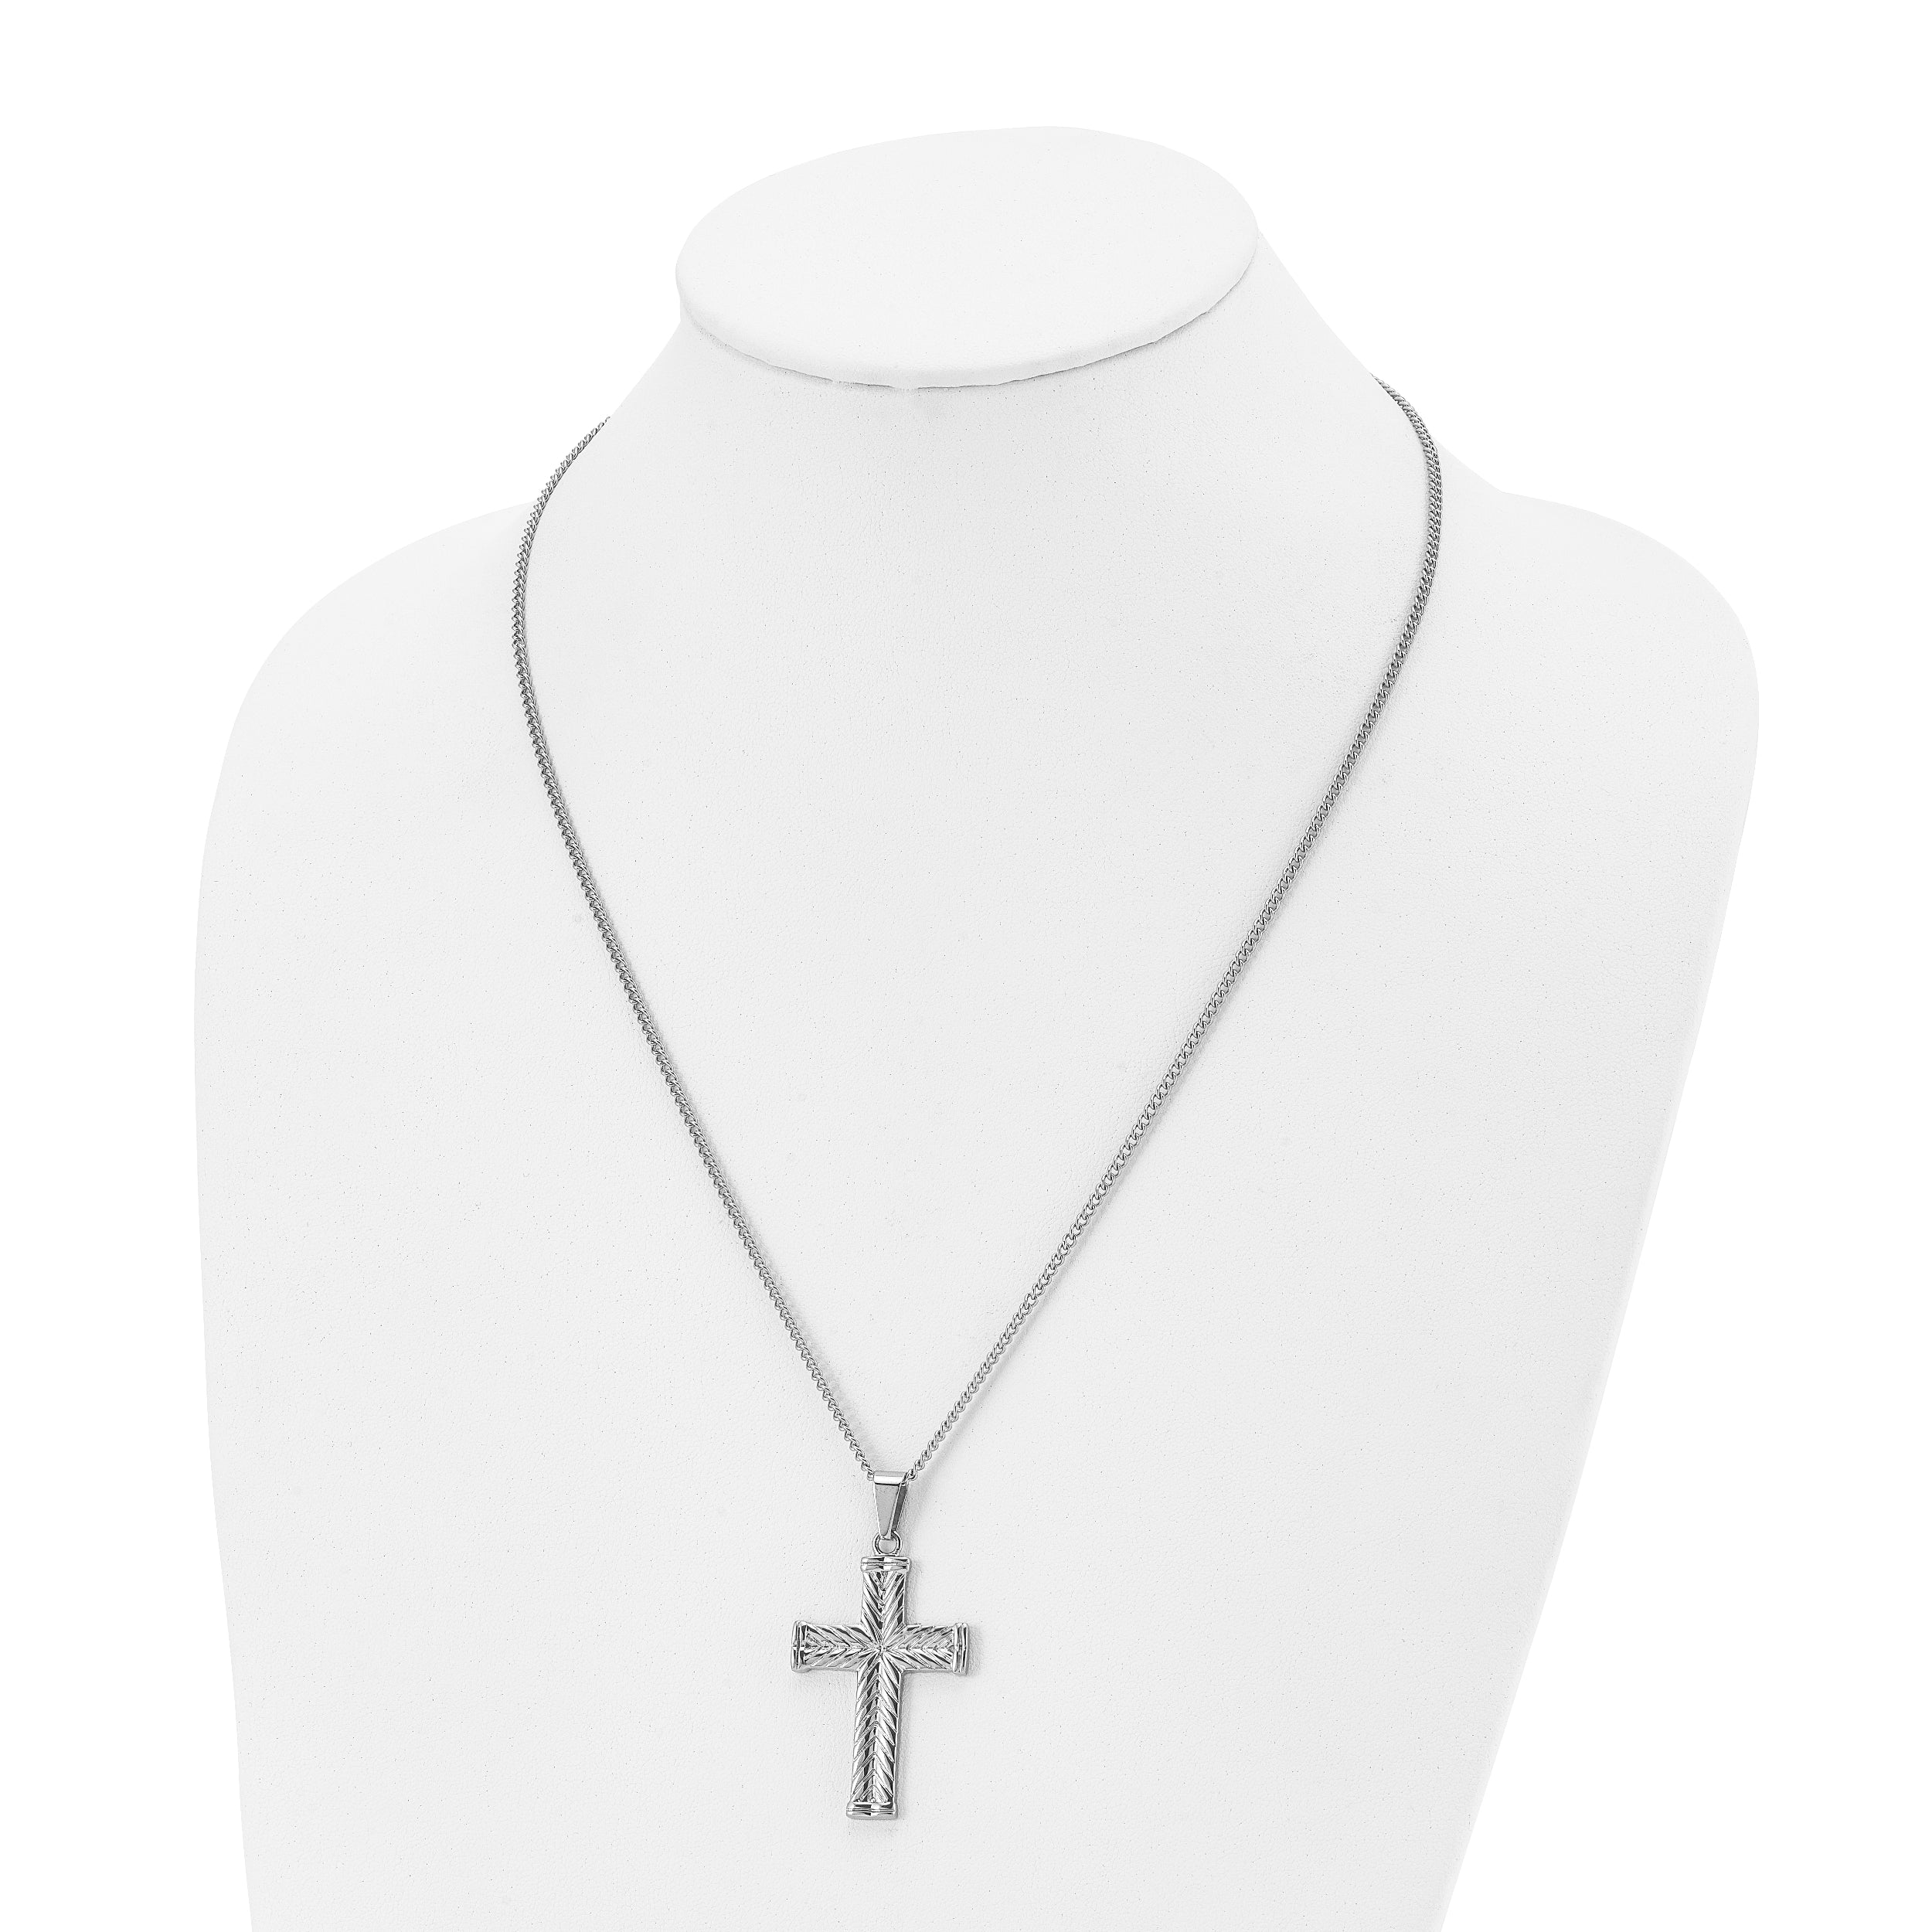 Chisel Stainless Steel Polished and Textured Cross Pendant on a 22 inch Curb Chain Necklace